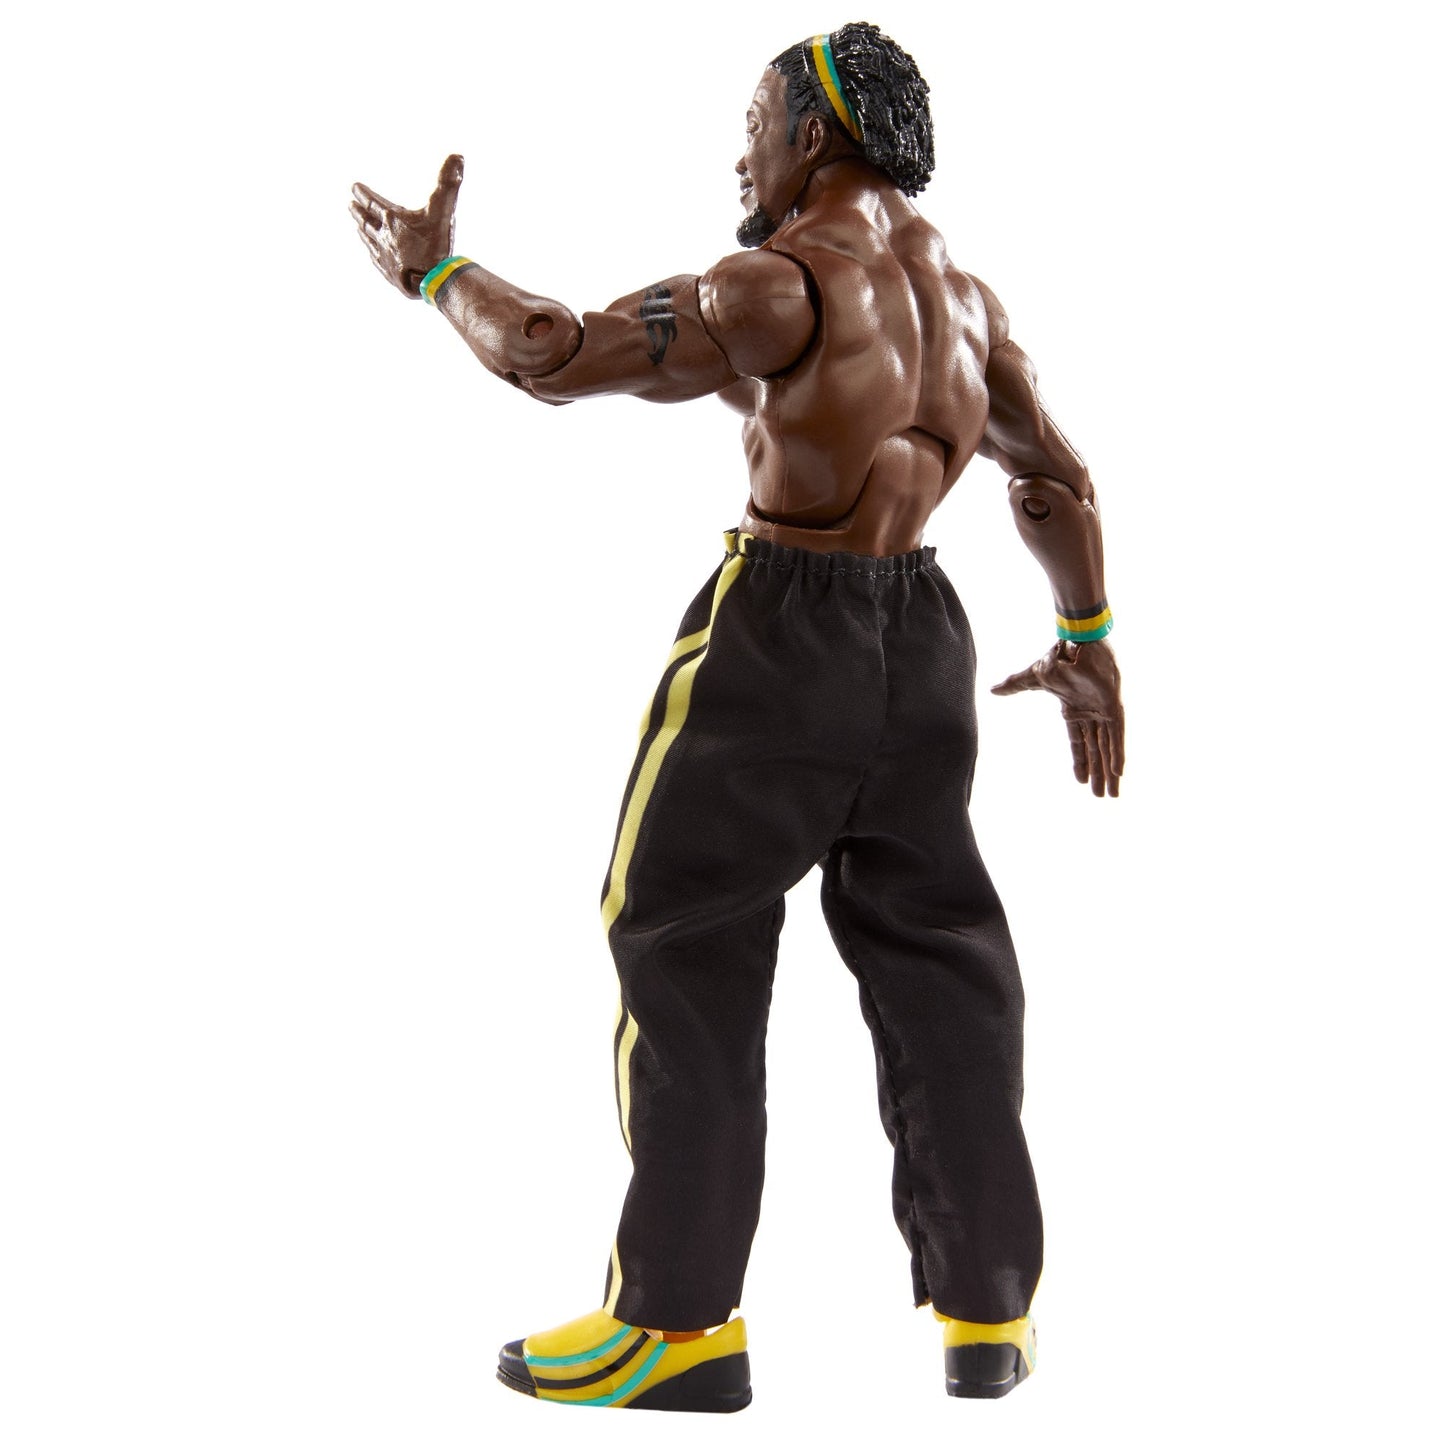 2020 WWE Mattel Elite Collection Decade of Domination Series 2 Kofi Kingston [With Pants On, Exclusive]